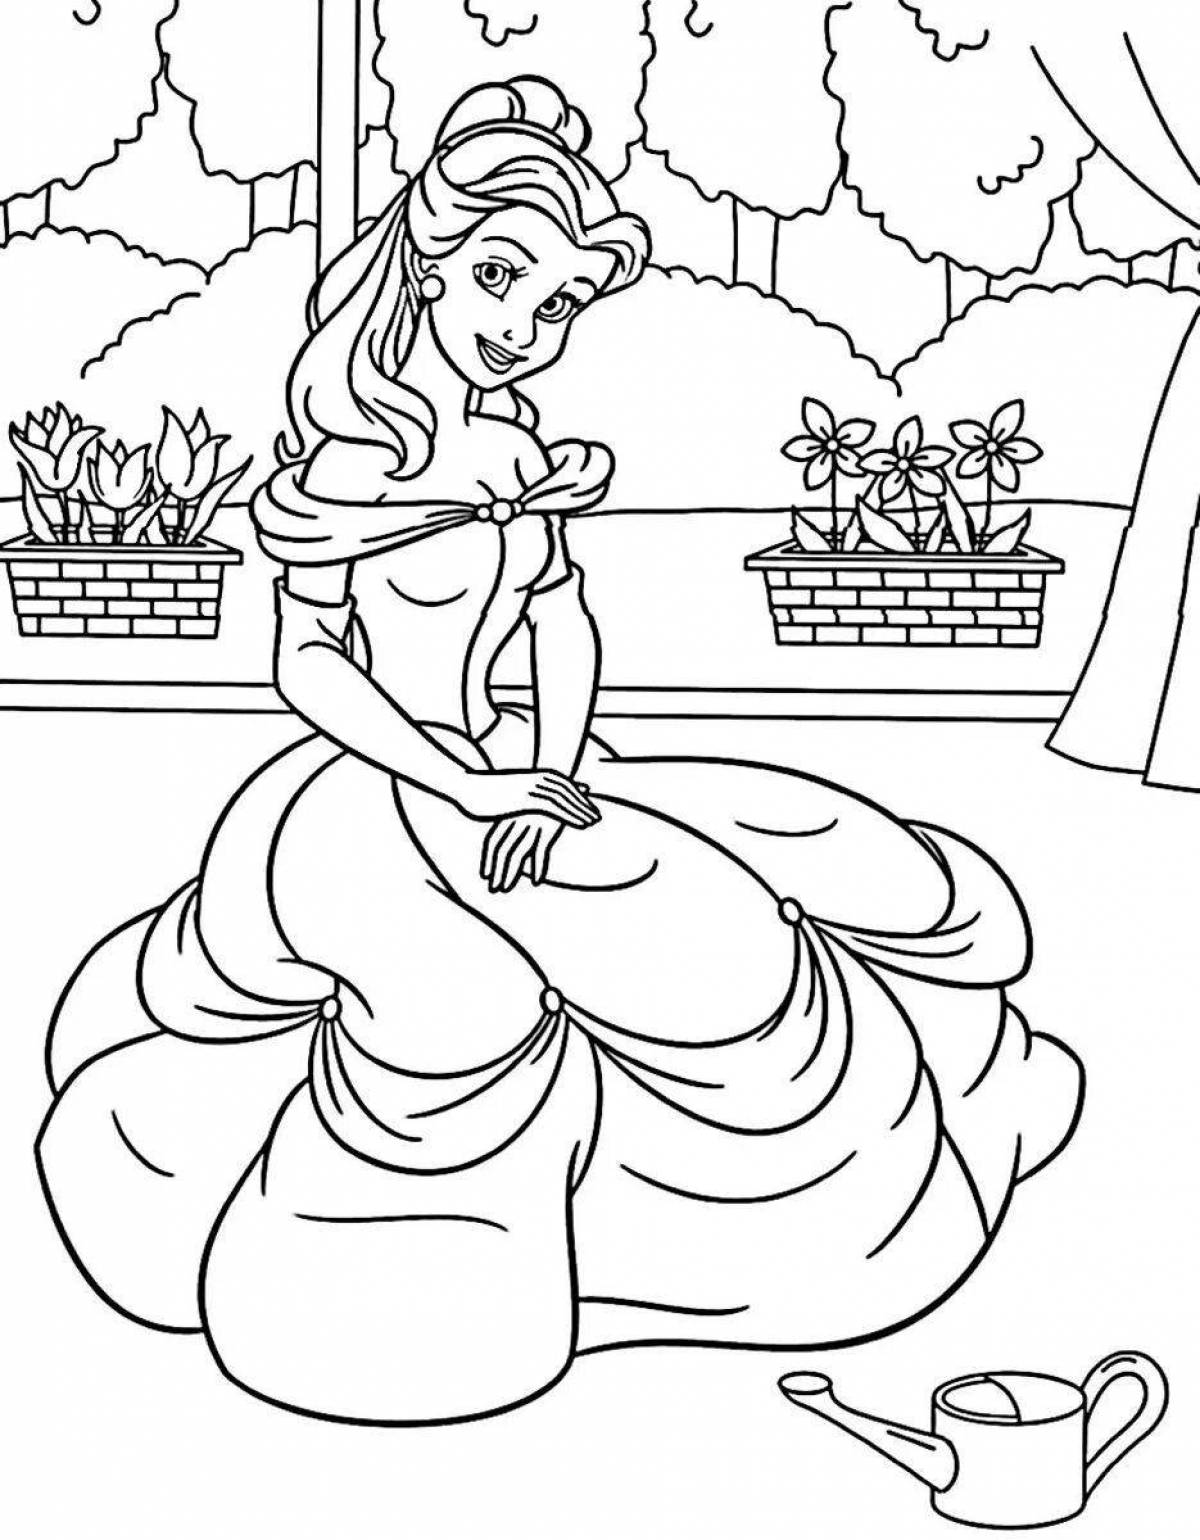 Amazing coloring pages for princesses 4-5 years old